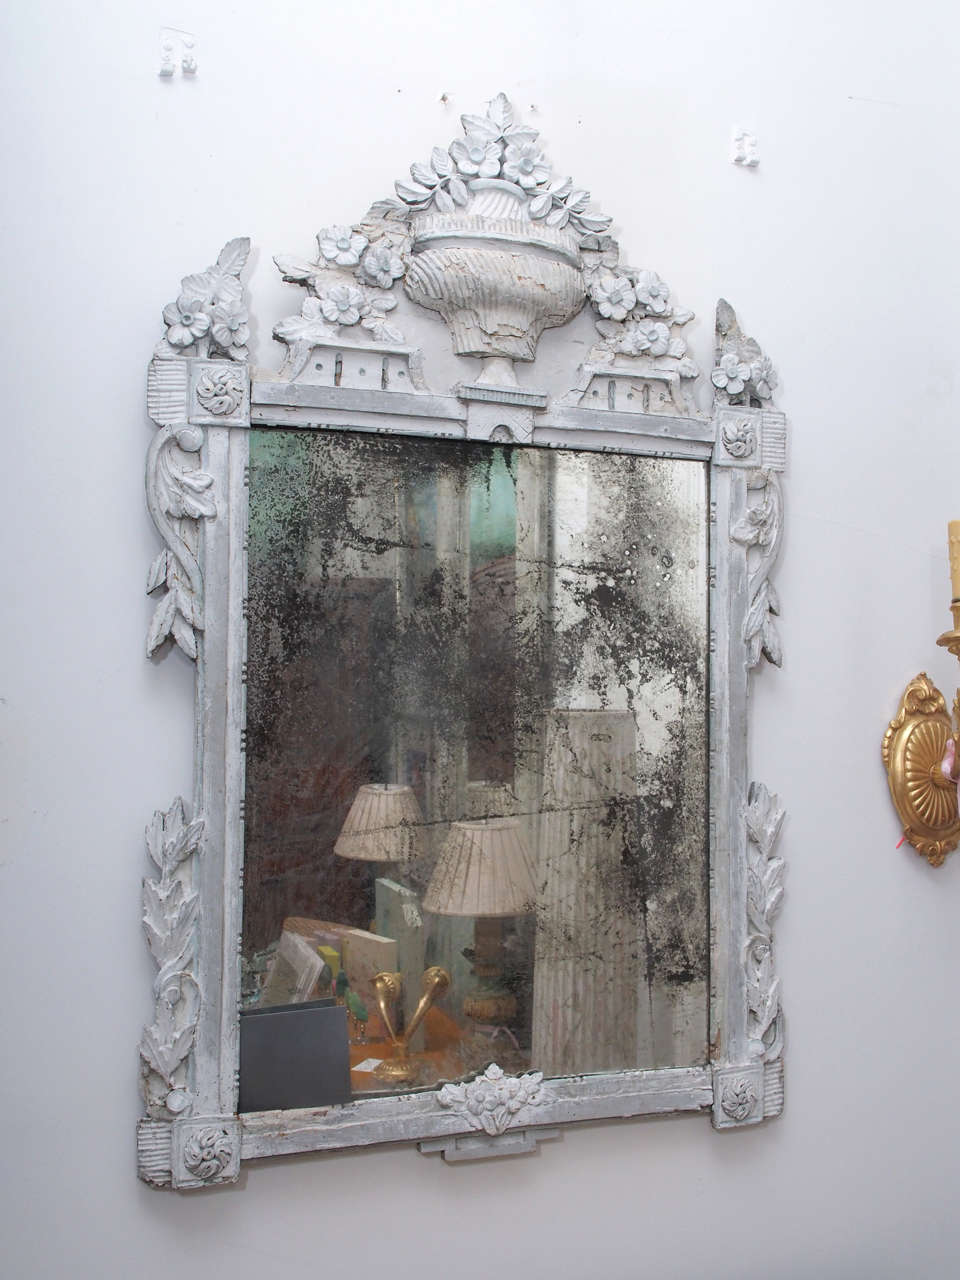 Carved wood and painted Louis mirror is painted white and grey. The paint is worn and faded, which emphasizes the carved wood designs.  The paint and wood are cracked and crusty looking in certain areas.  The mirror is dark and rubbed off